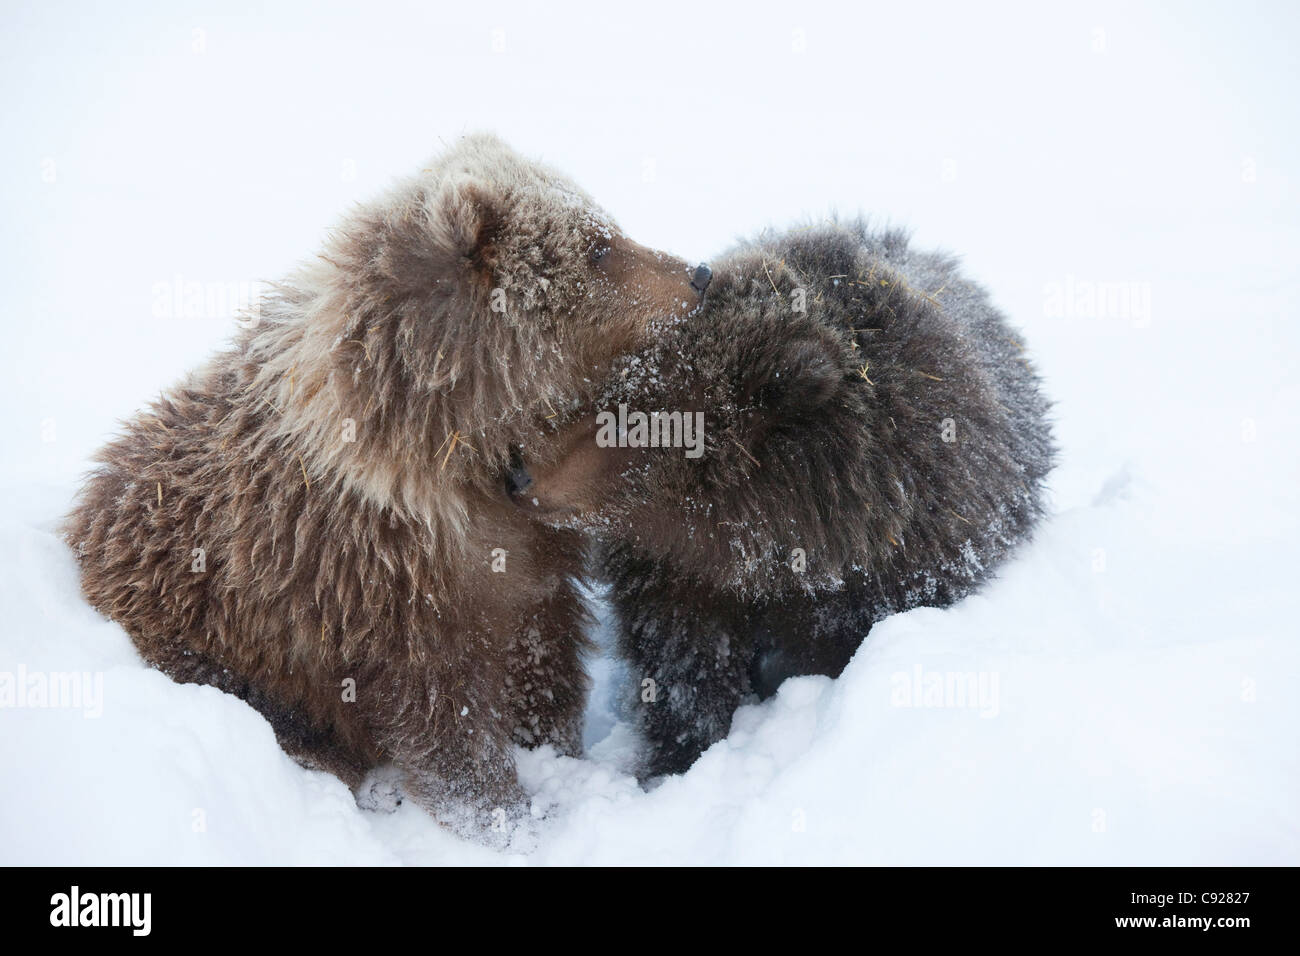 CAPTIVE: Male and female Kodiak Brown bear cubs snuggle together in the snow at the Alaska Wildlife Conservation Center, Alaska Stock Photo